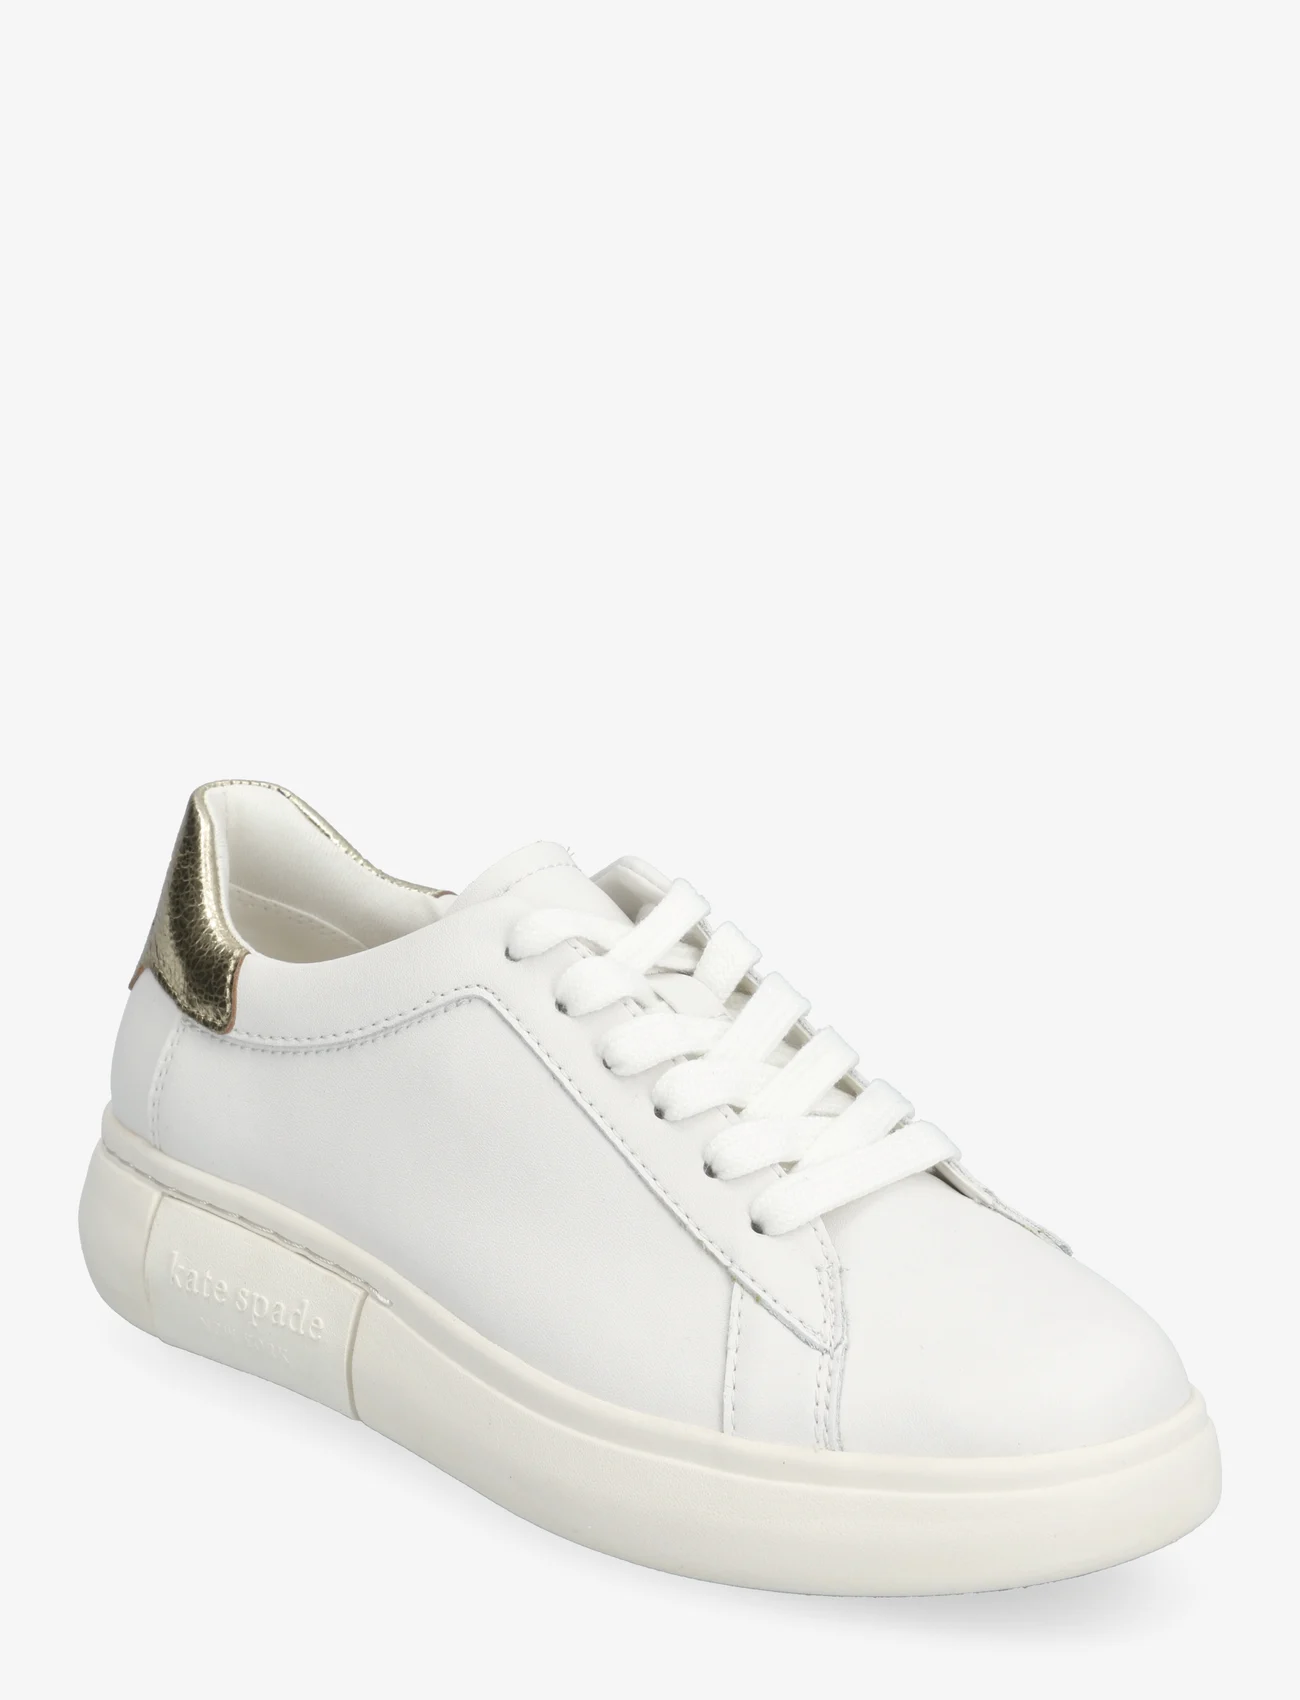 Kate Spade - LIFT - low top sneakers - optic white/pale gold - 0